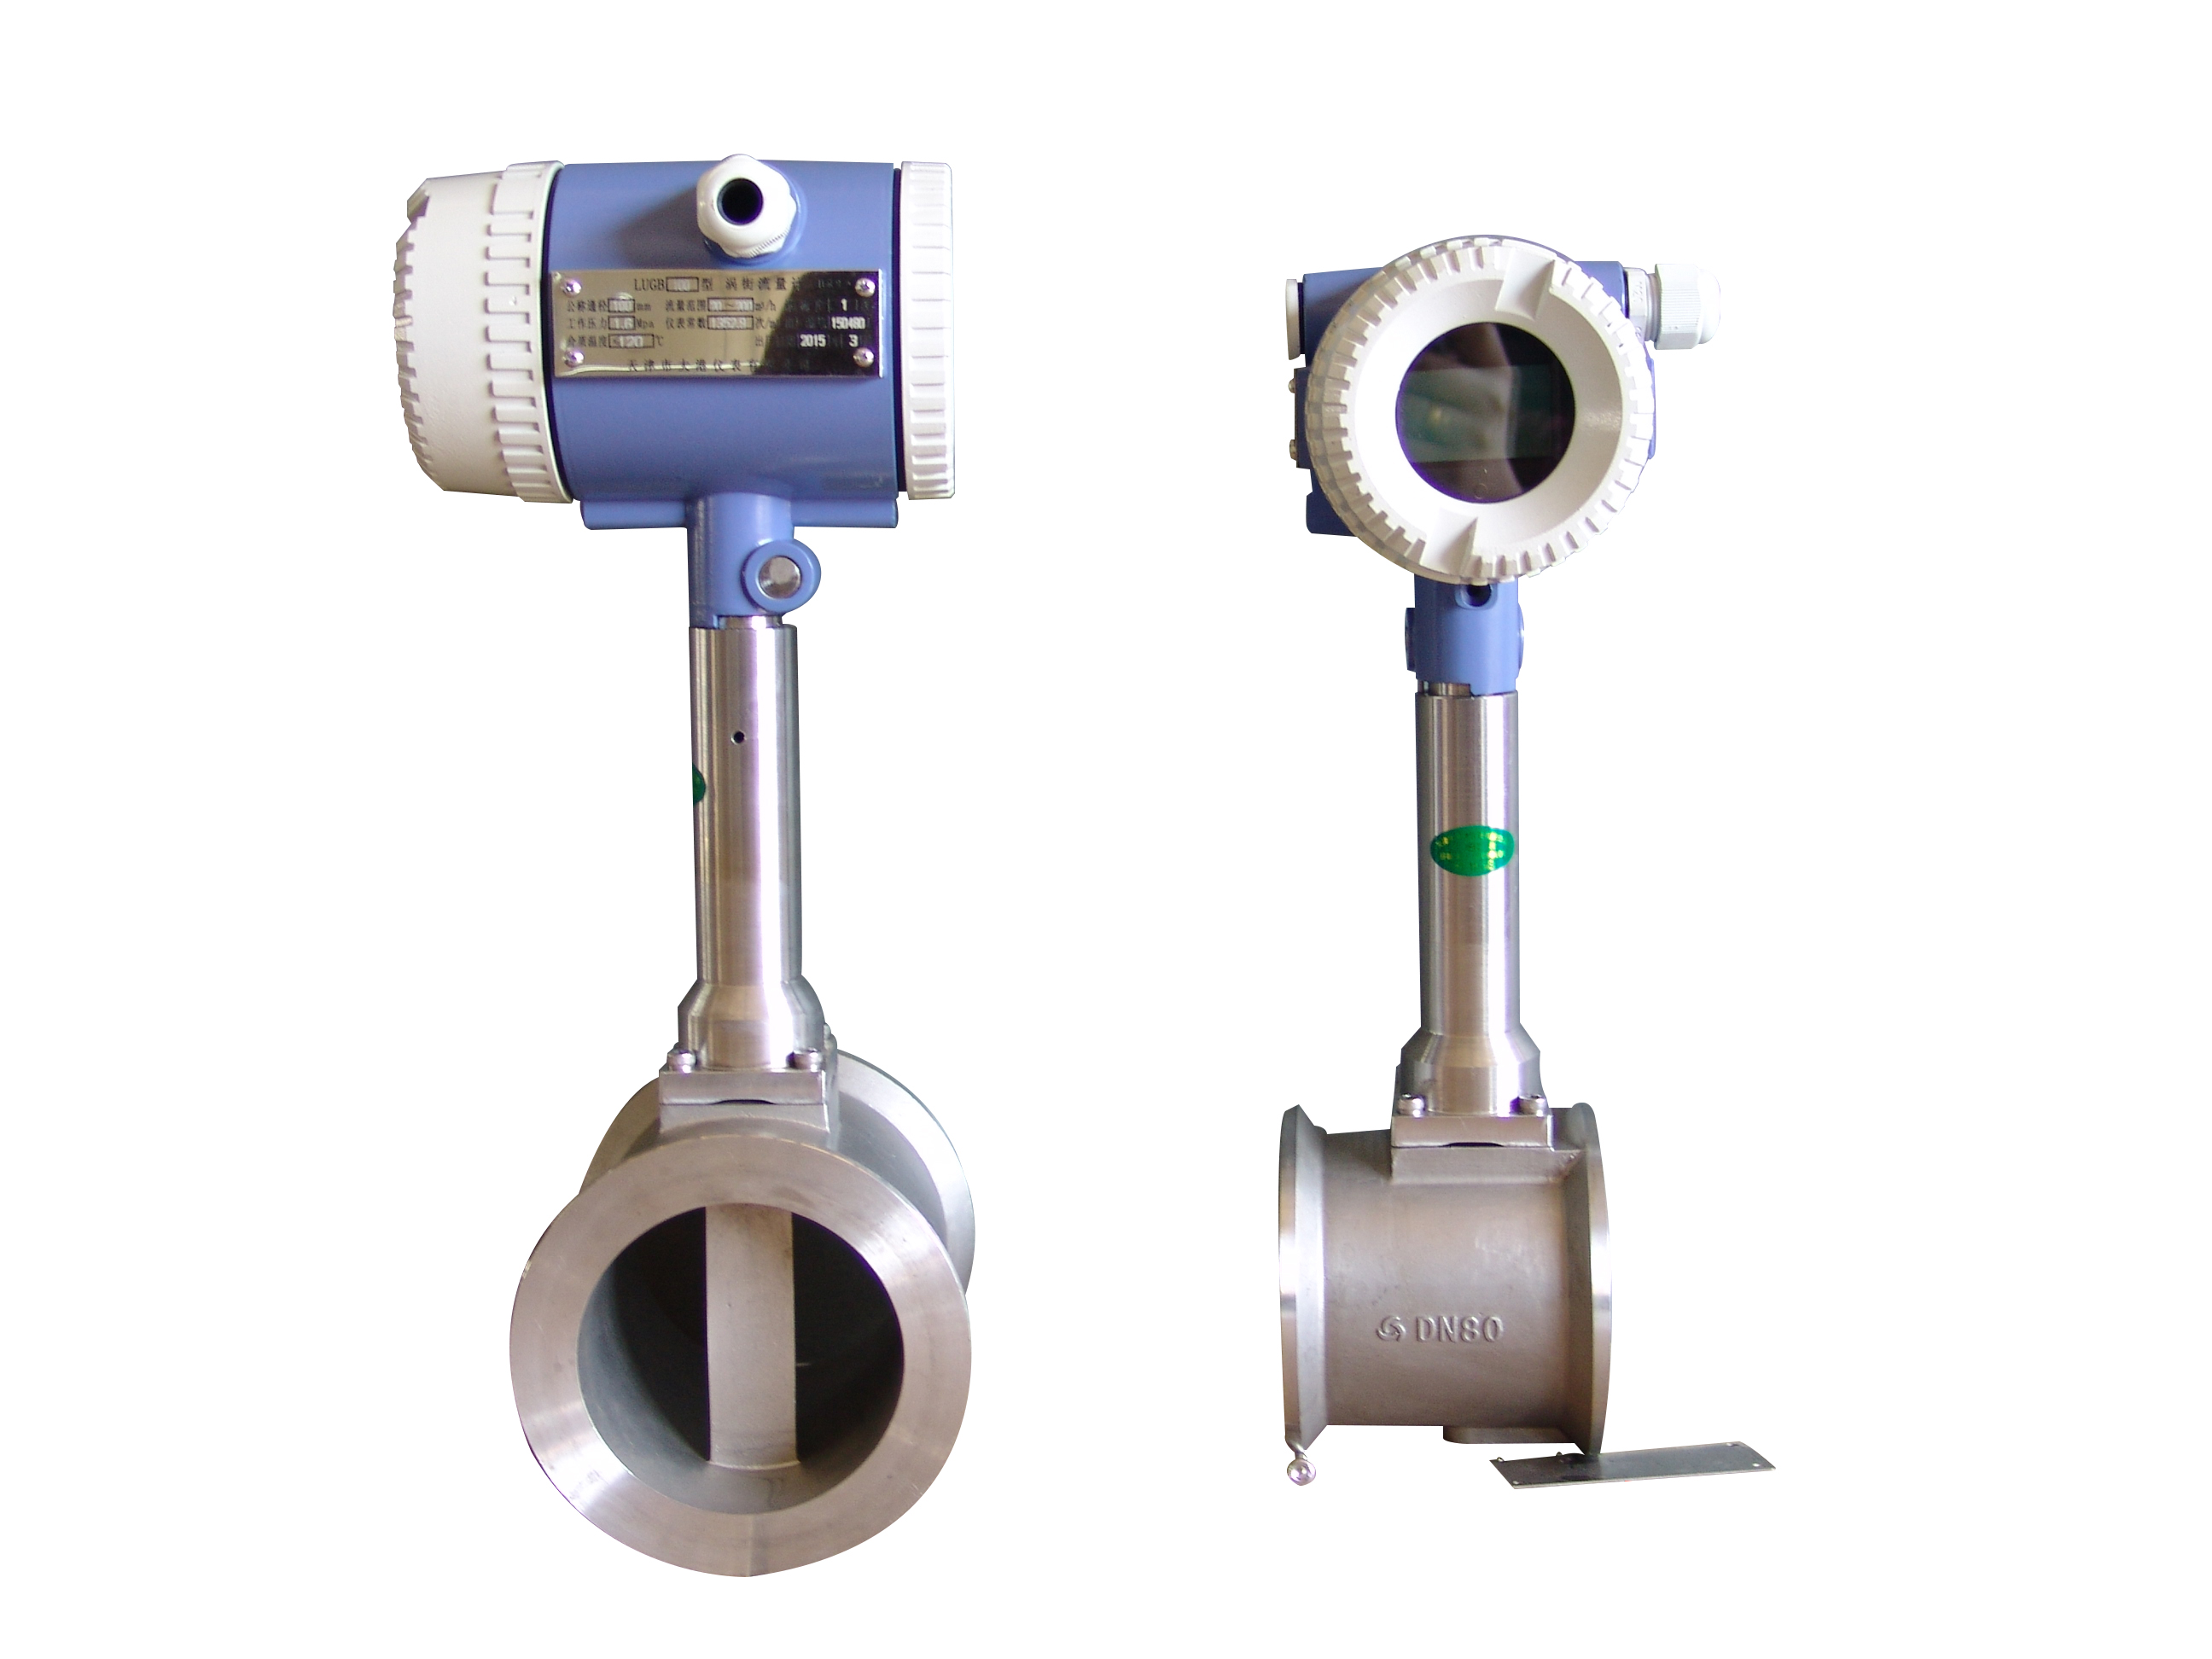 Vortex flowmeter/Integration/With liquid crystal display/With 4-20mA signal output/Metering steam/Tri-Clamp/304 Full stainless steel material